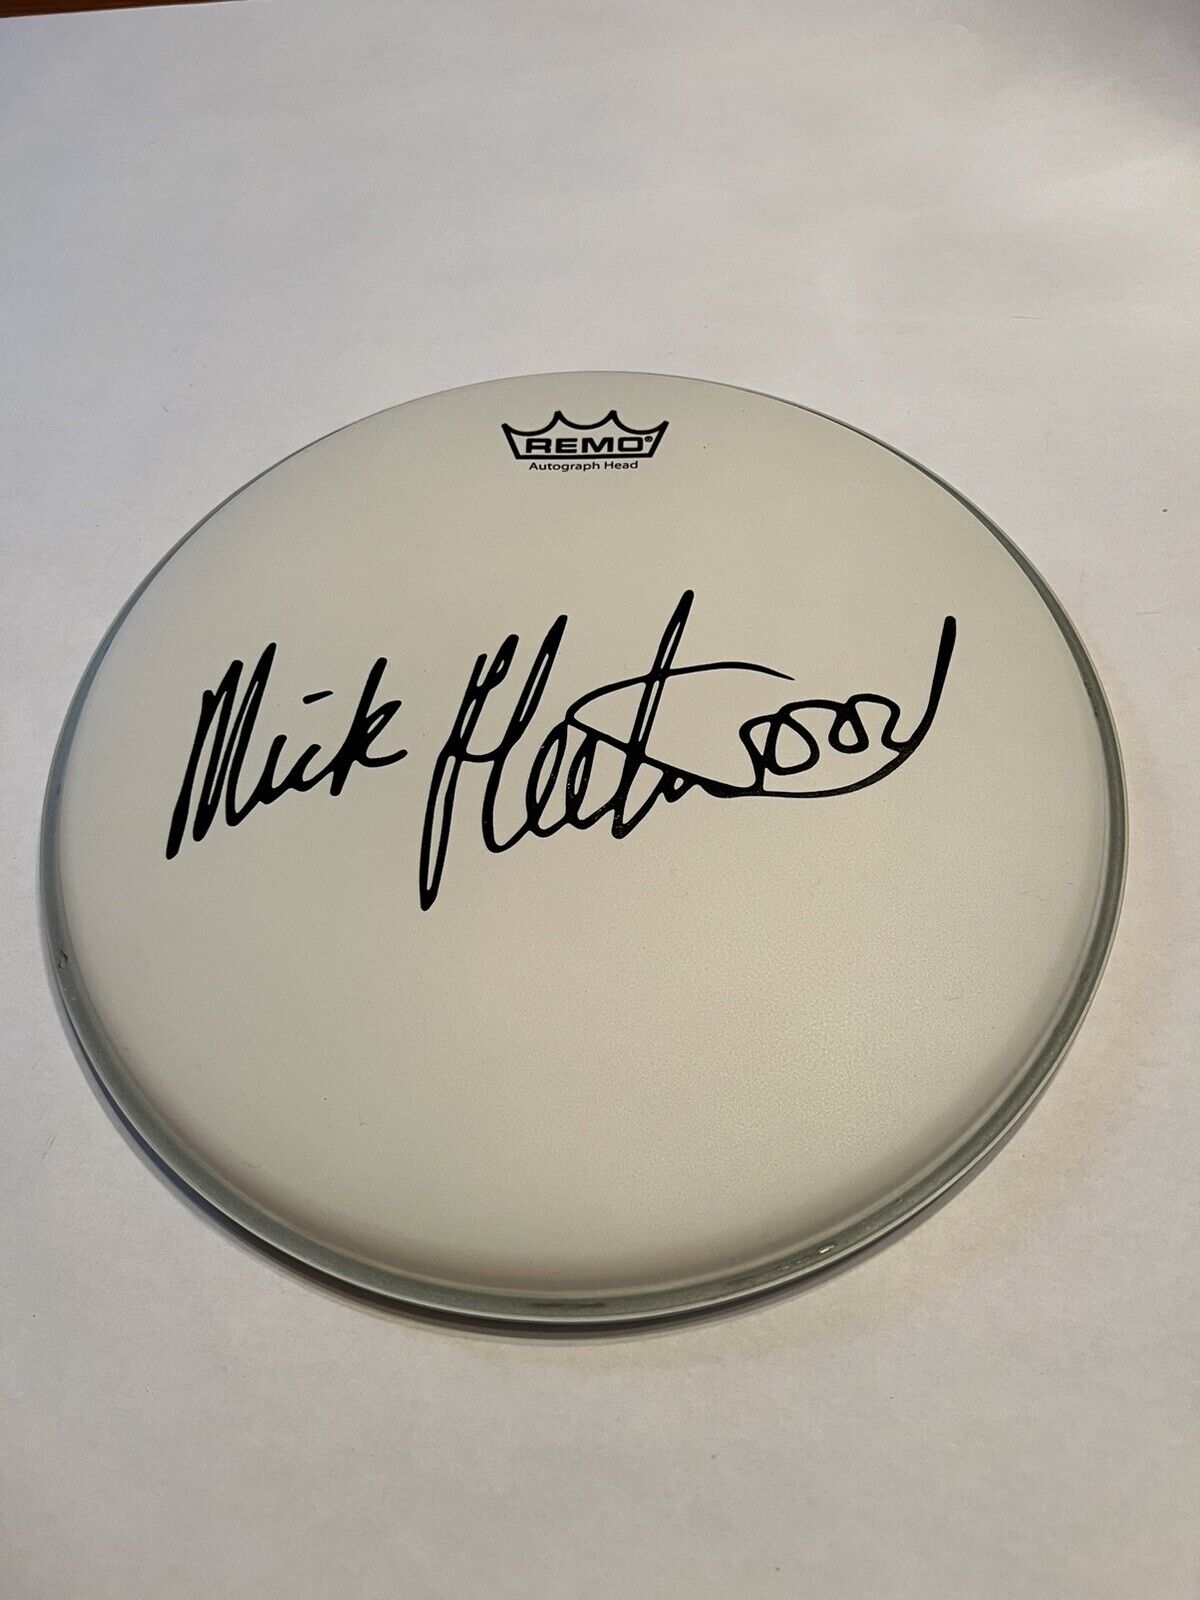 REMO Printed Autograph Drum Head of Mick Fleetwood Signature. And VIP Laminate